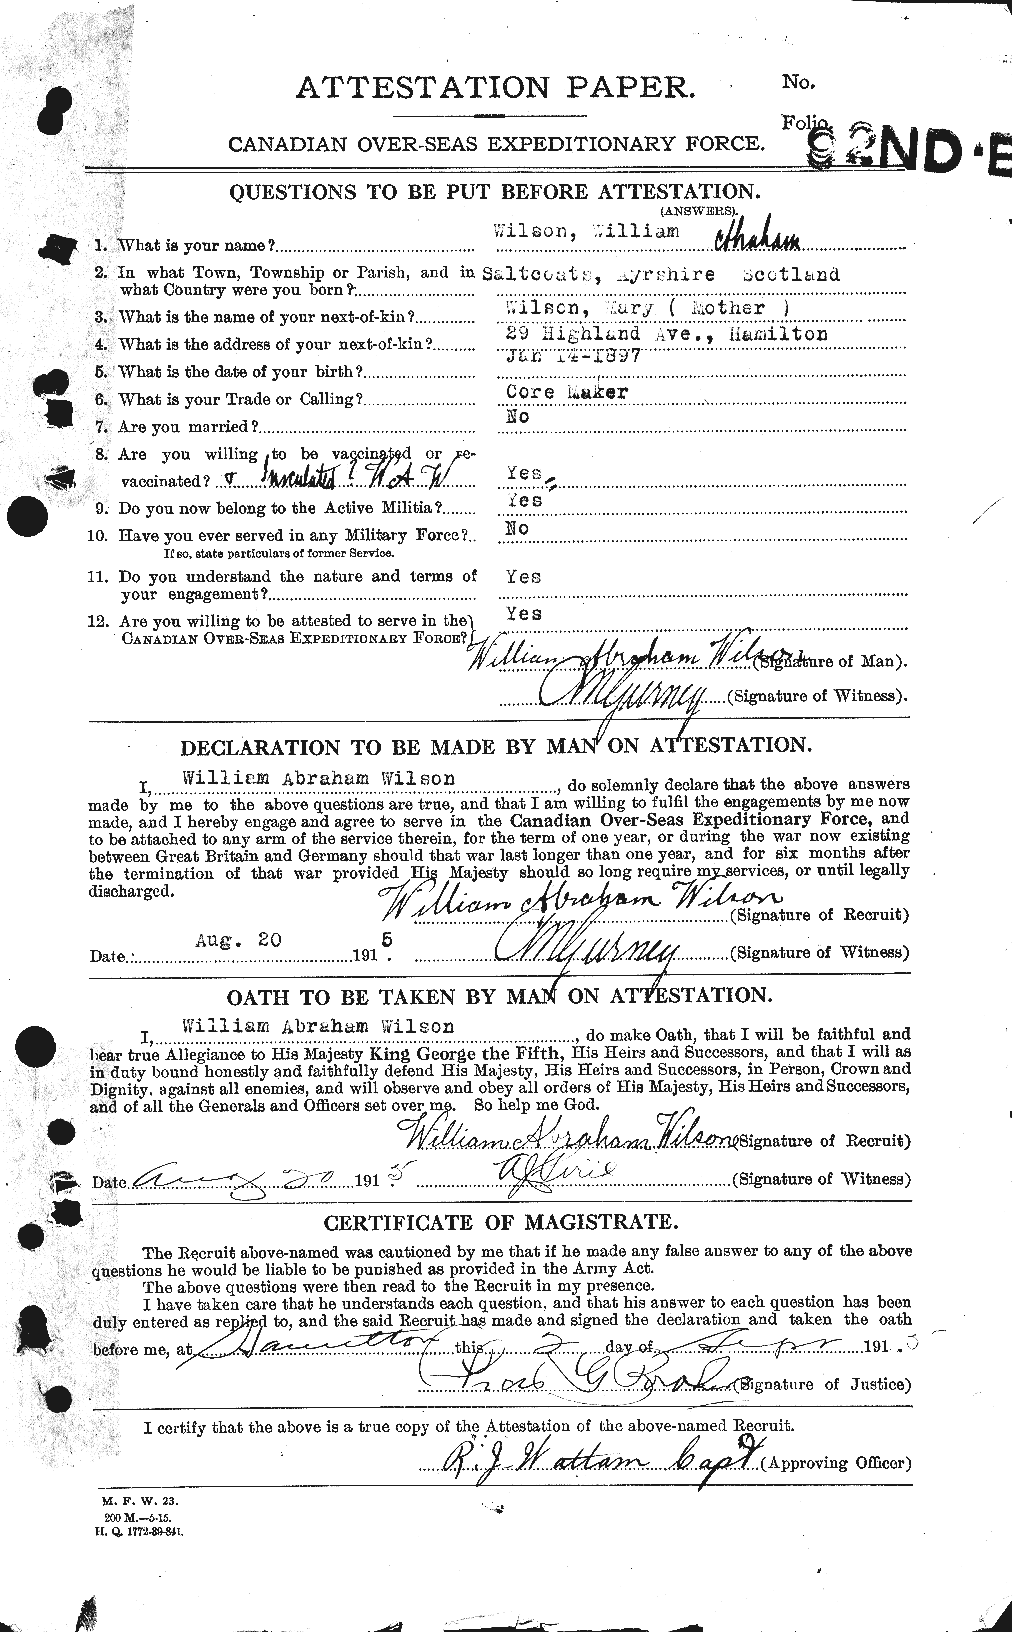 Personnel Records of the First World War - CEF 681921a